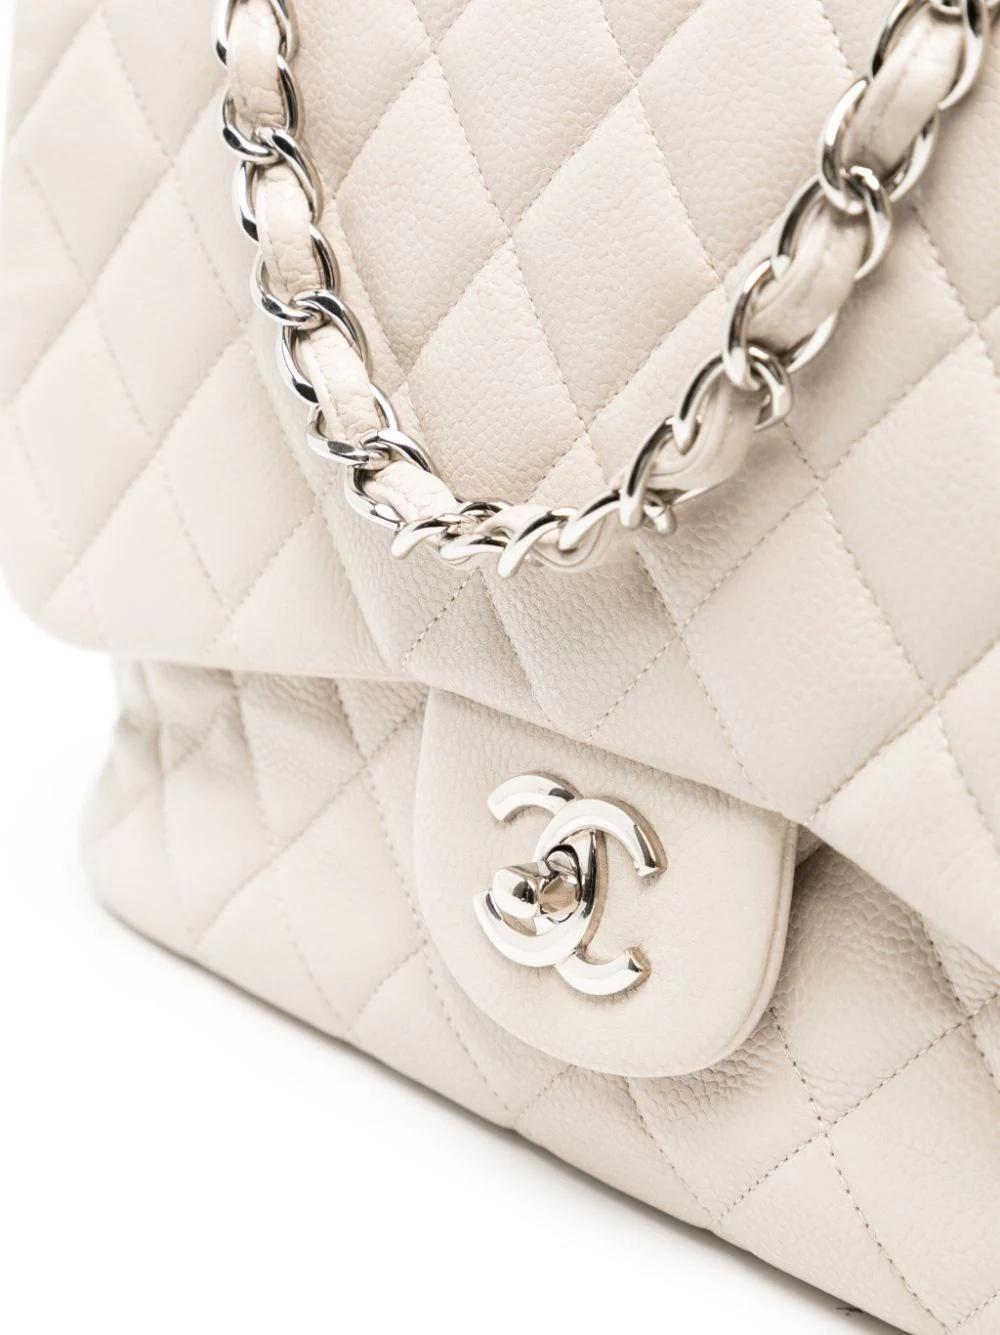 * Crafted in 2011
* White
* Caviar leather
* Diamond quilting
* Leather and chain-link shoulder strap
* Single Flap
* Front flap closure
* Signature interlocking CC turn-lock fastening
* Main compartment
* Internal slip pocket
* Internal